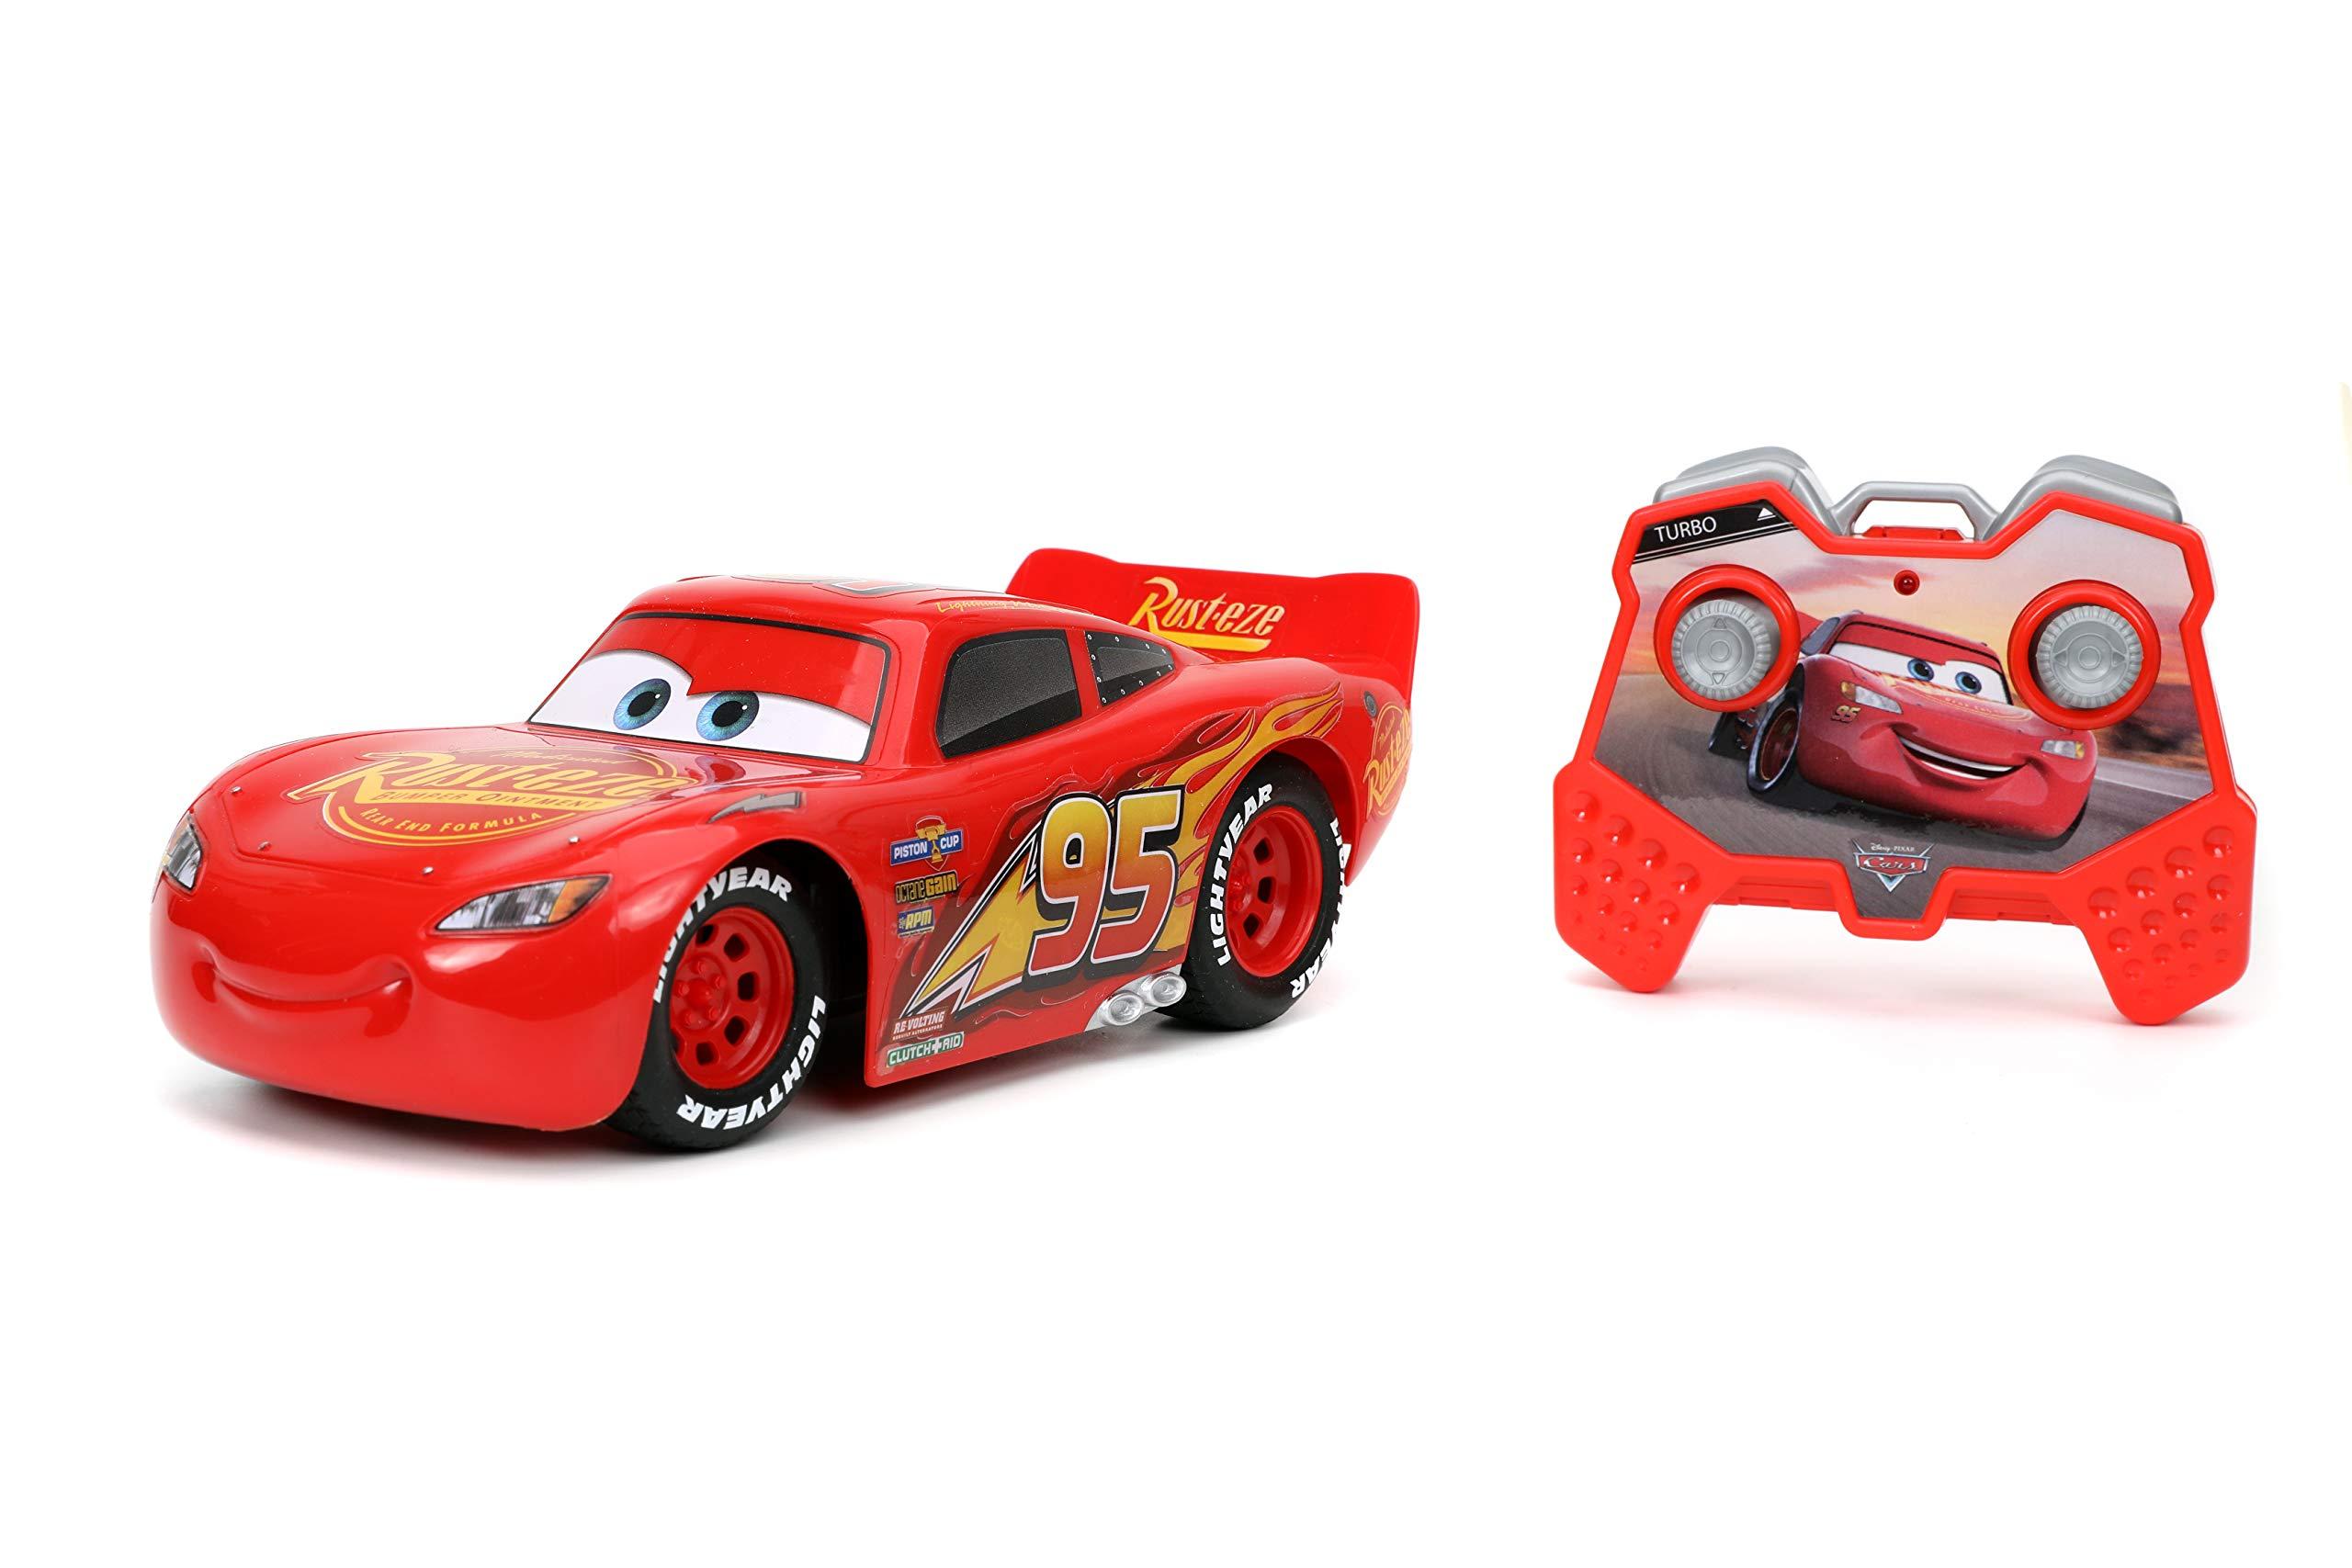 Mcqueen Rc Car: Affordable options for purchasing the McQueen RC Car.